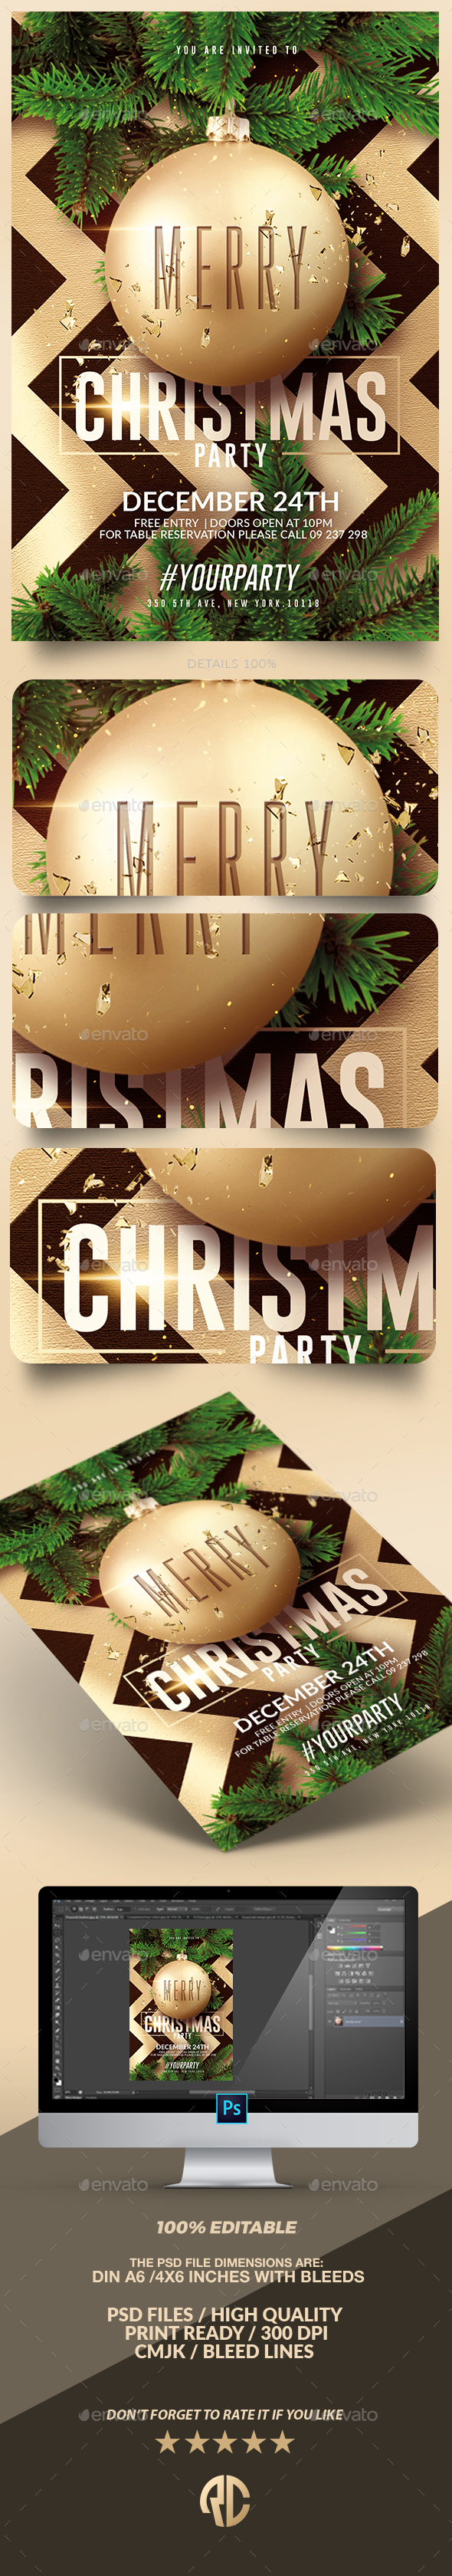 Classy Christmas Party | Psd flyer Template